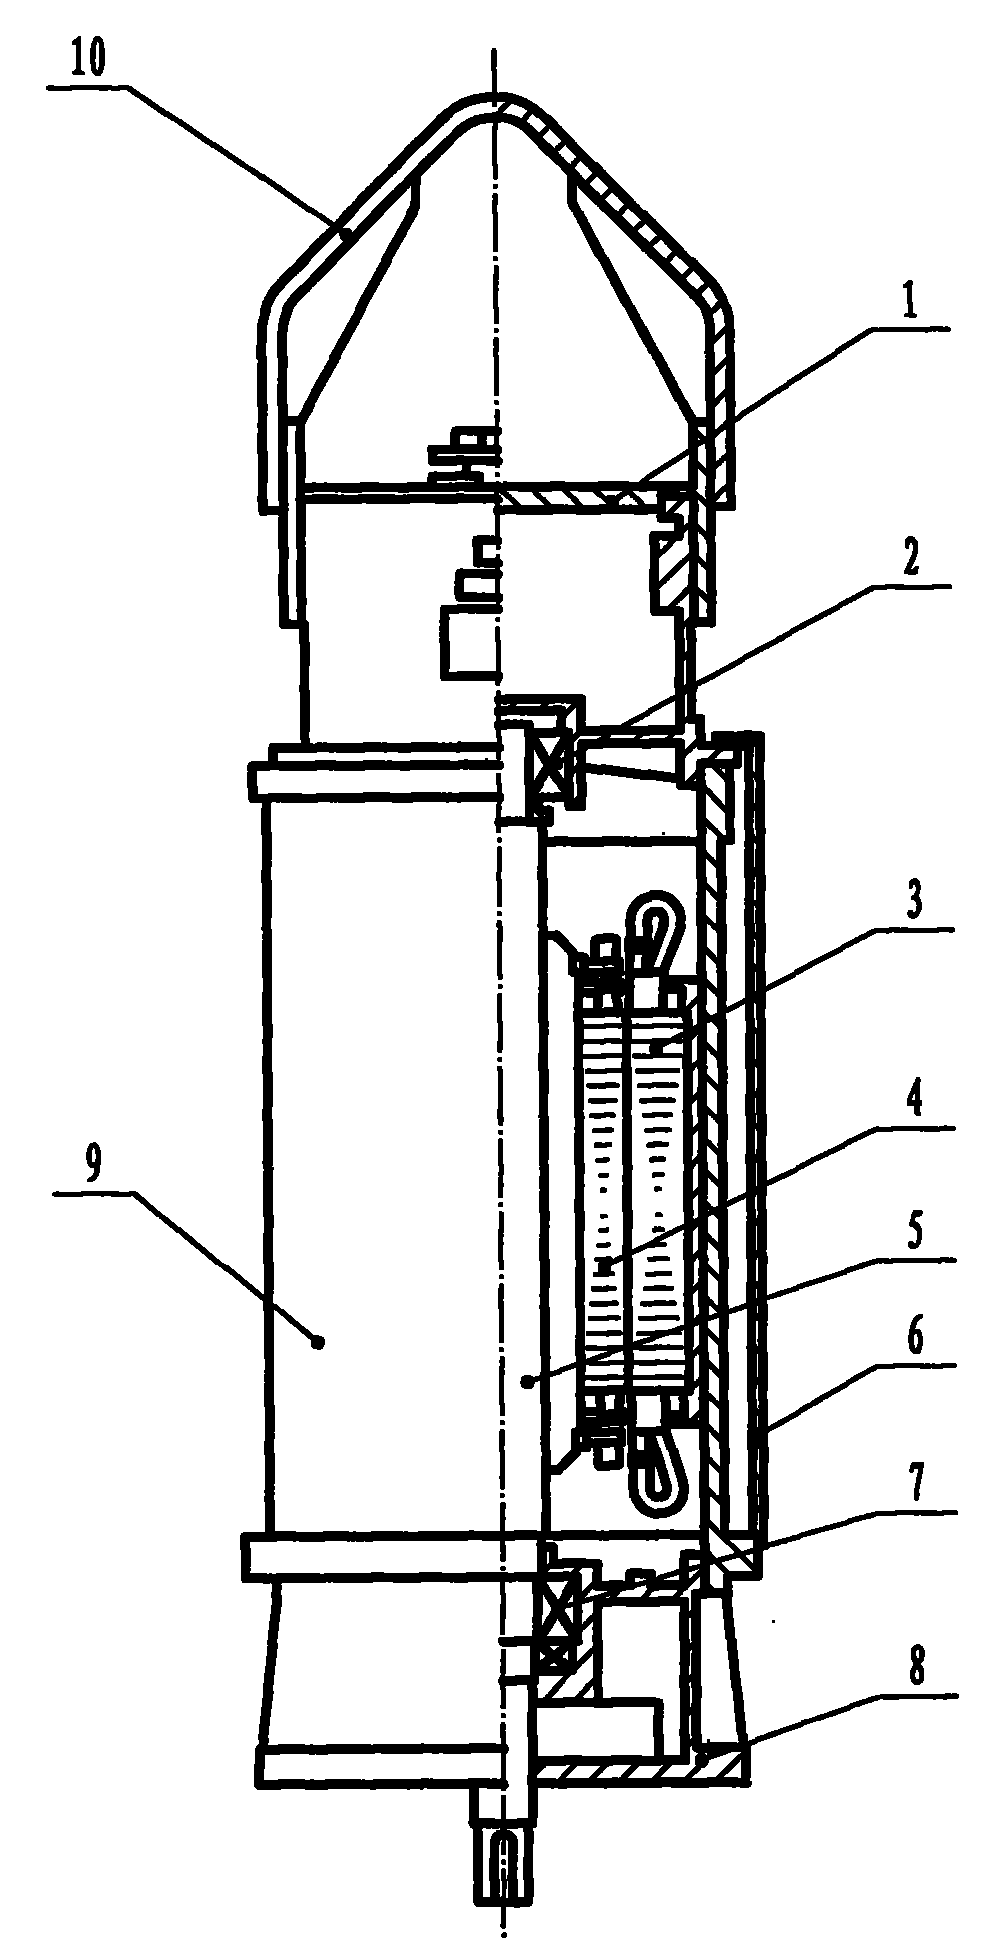 Low-lift flame-proof submerged motor